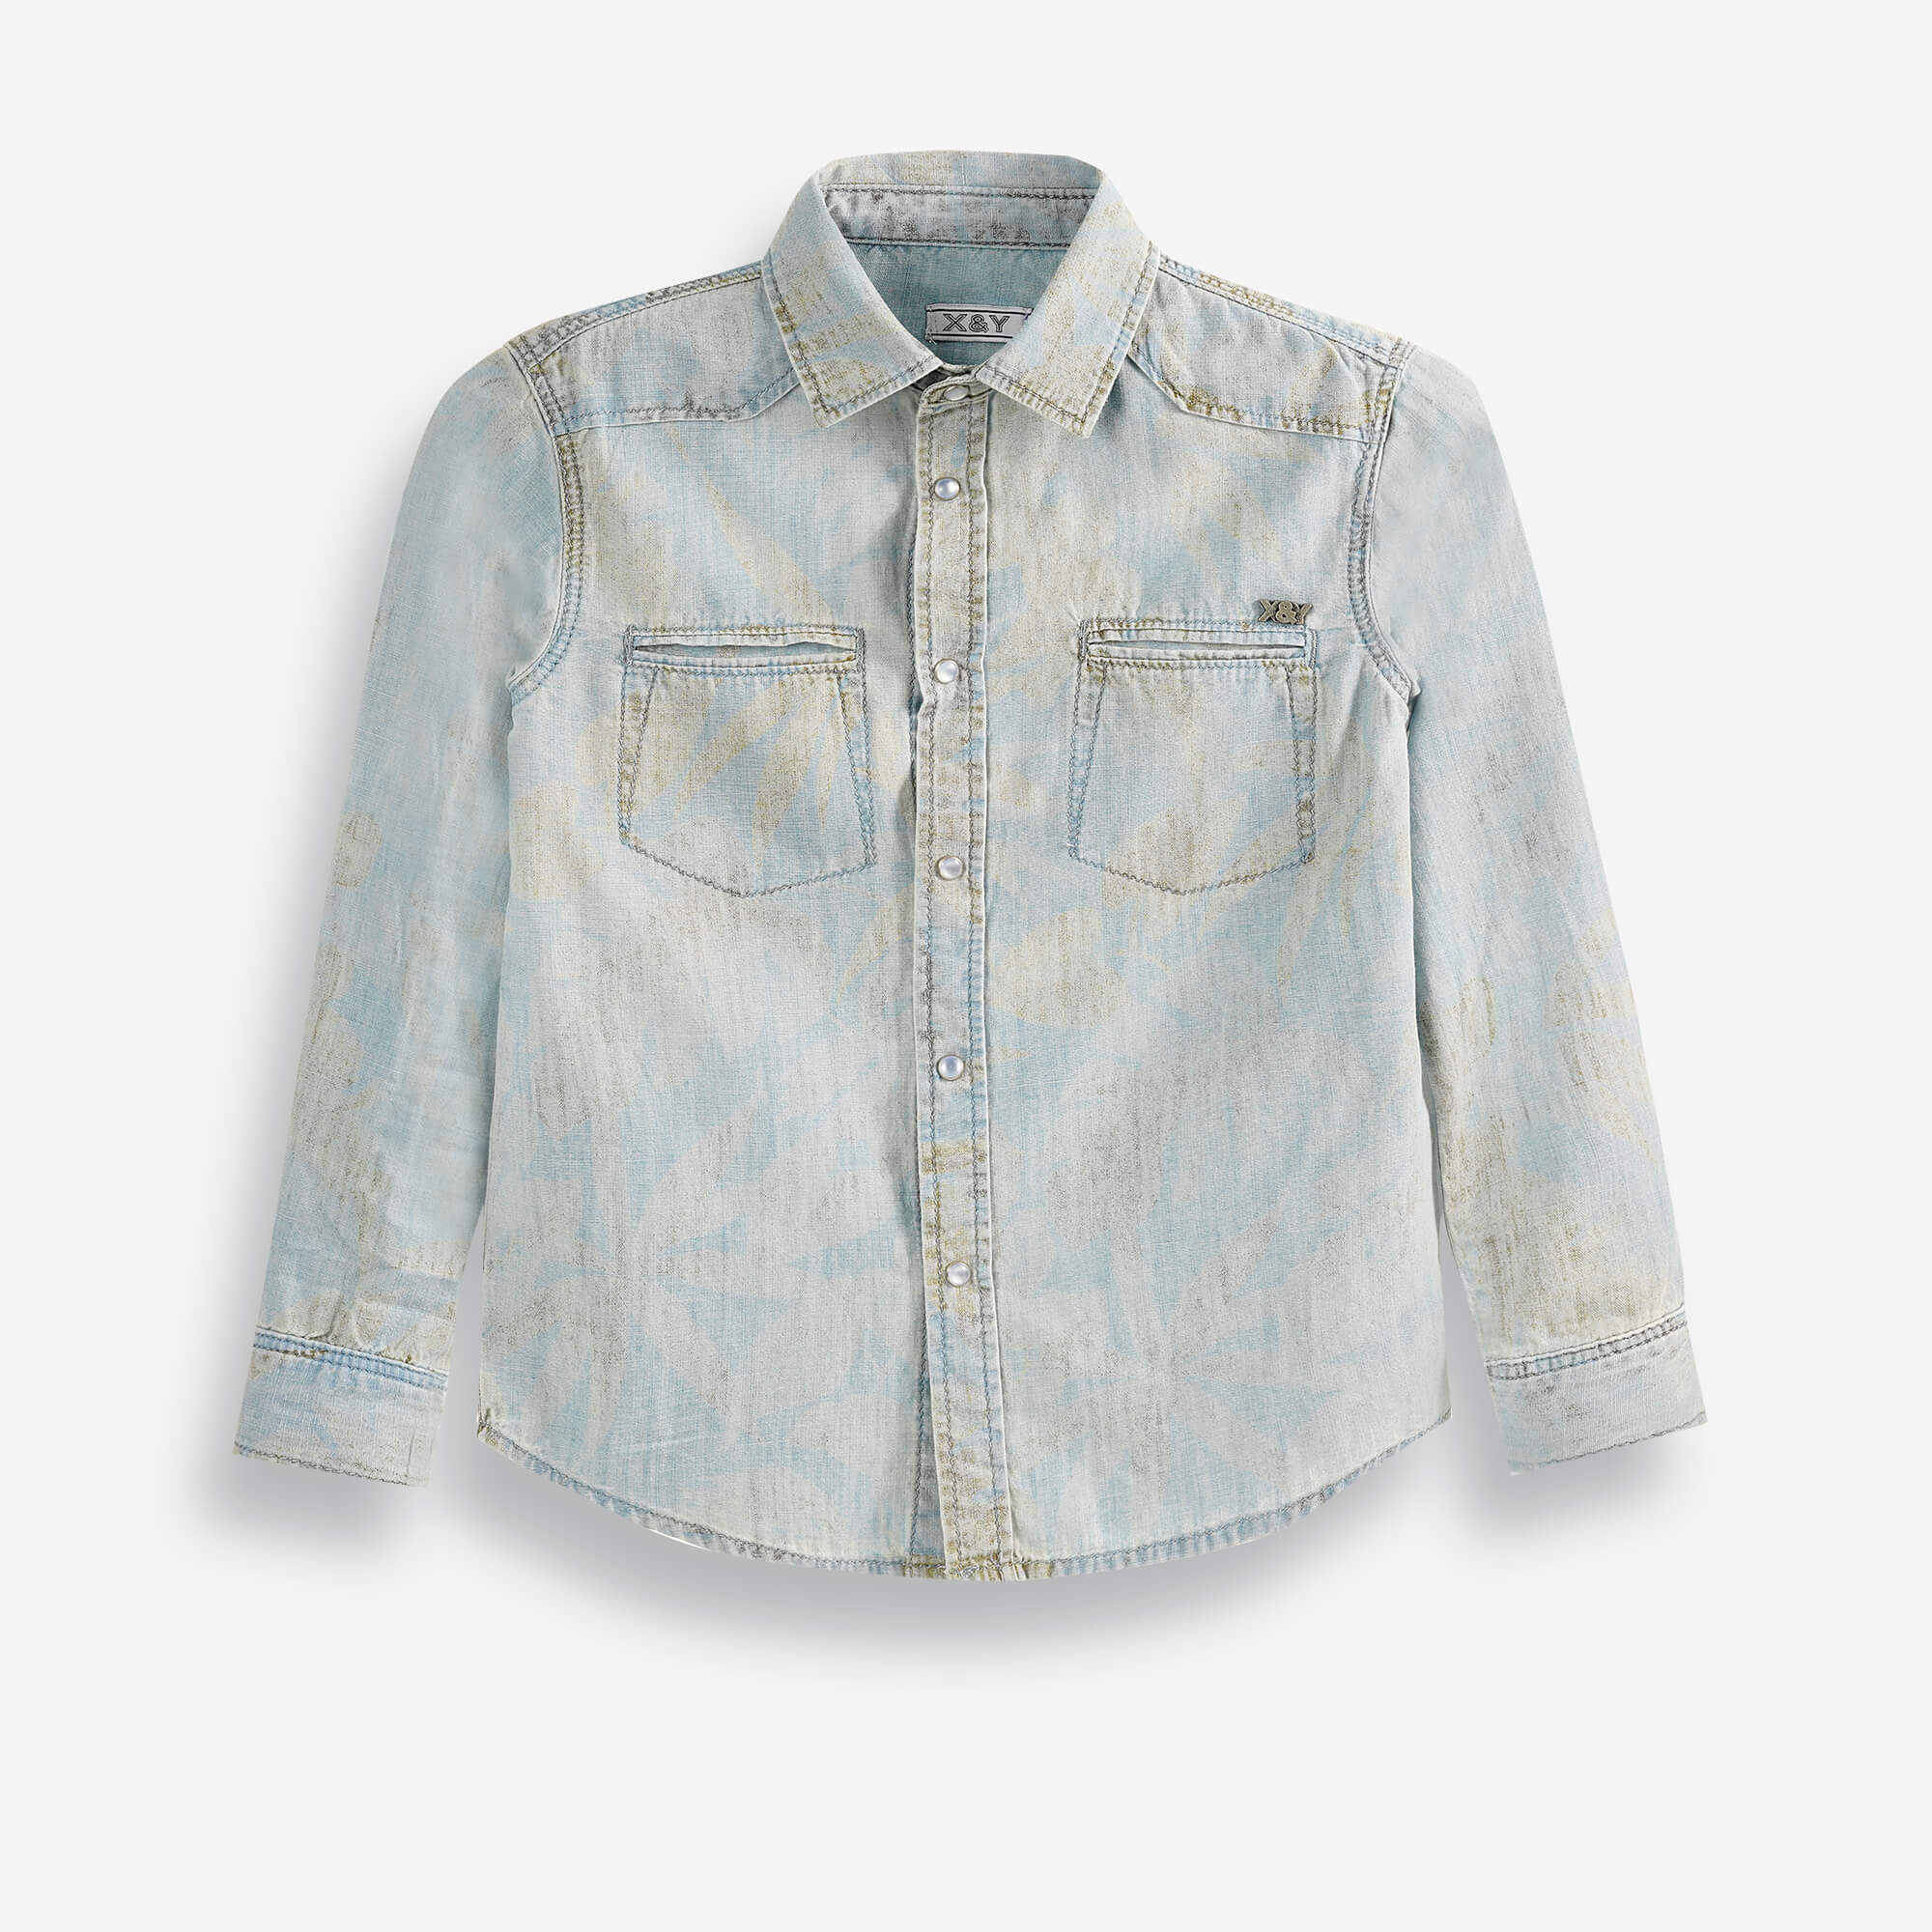 Boys' Collared Denim Shirt with an All-Over Graphic Pattern